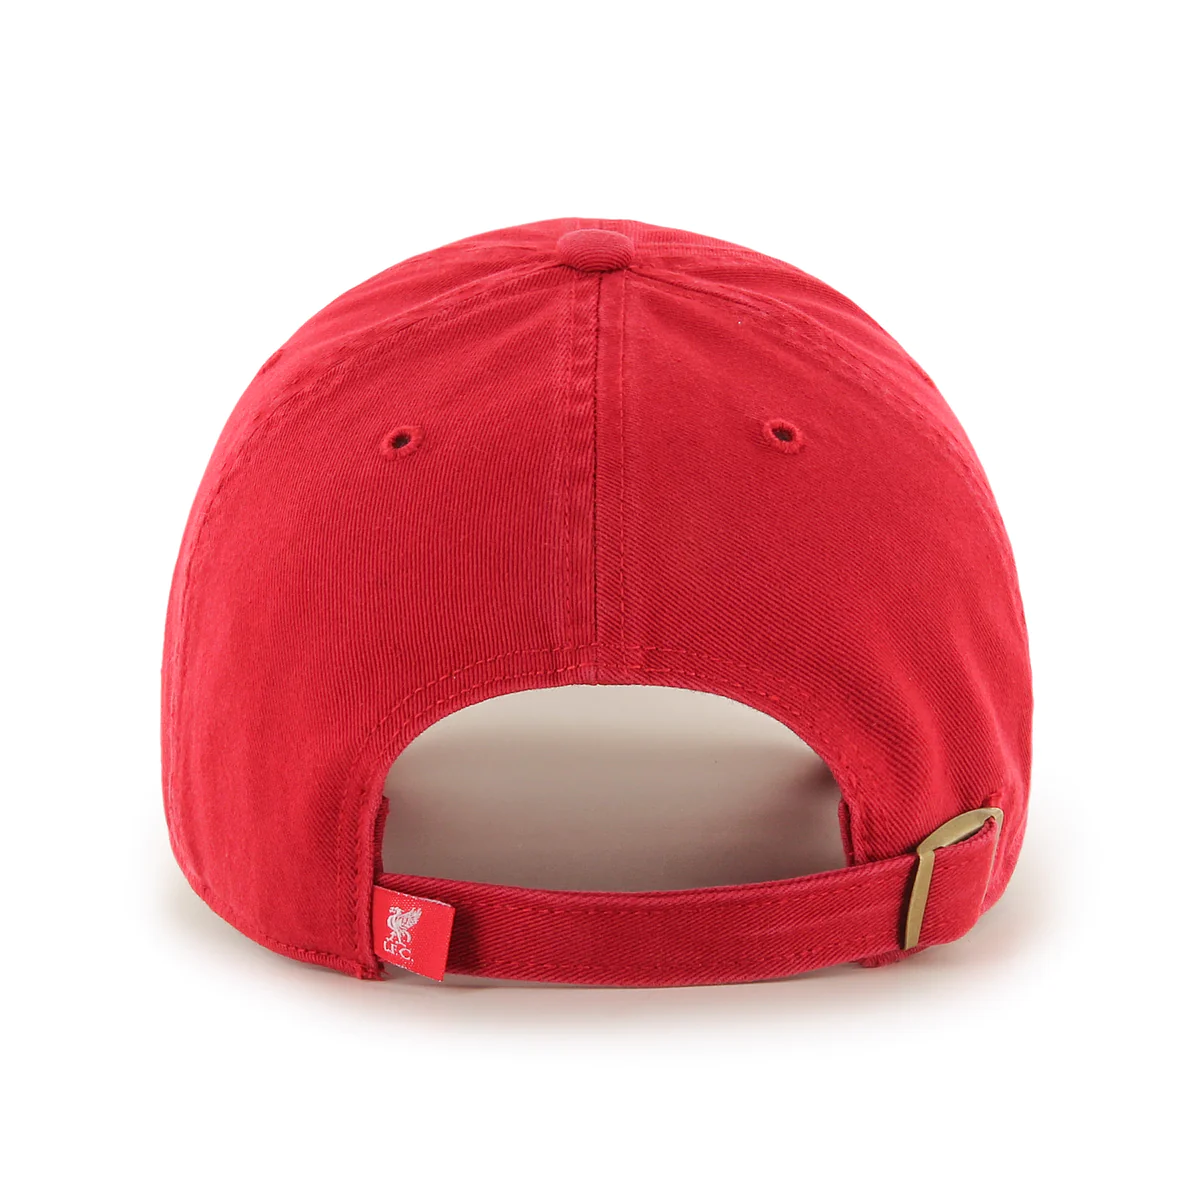 '47 Brand Liverpool FC Adjustable Clean Up Hat-Red